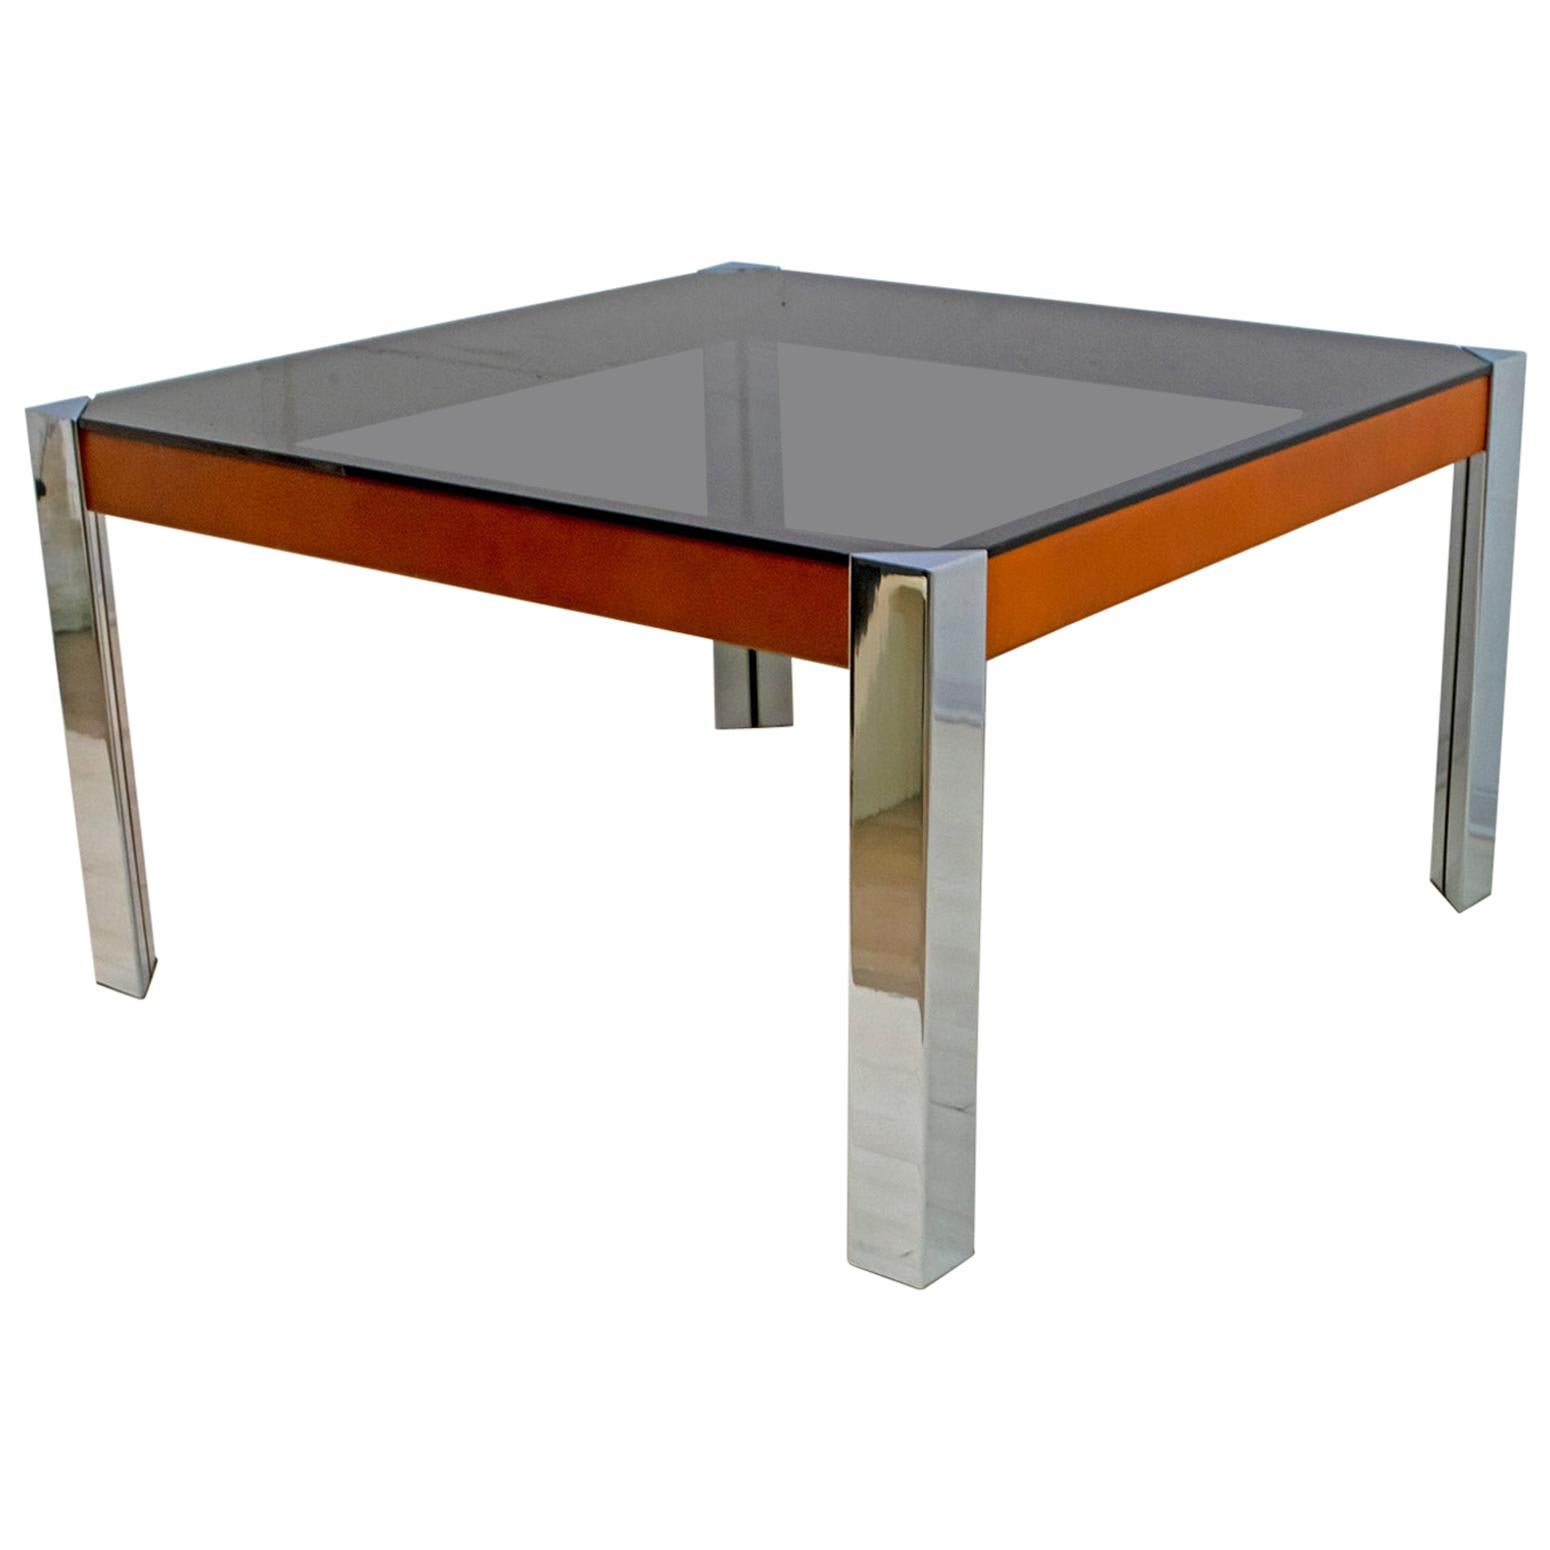 Willy Rizzo Mid-Century Modern Italian Chrome and Leather Dining Table, 1970s